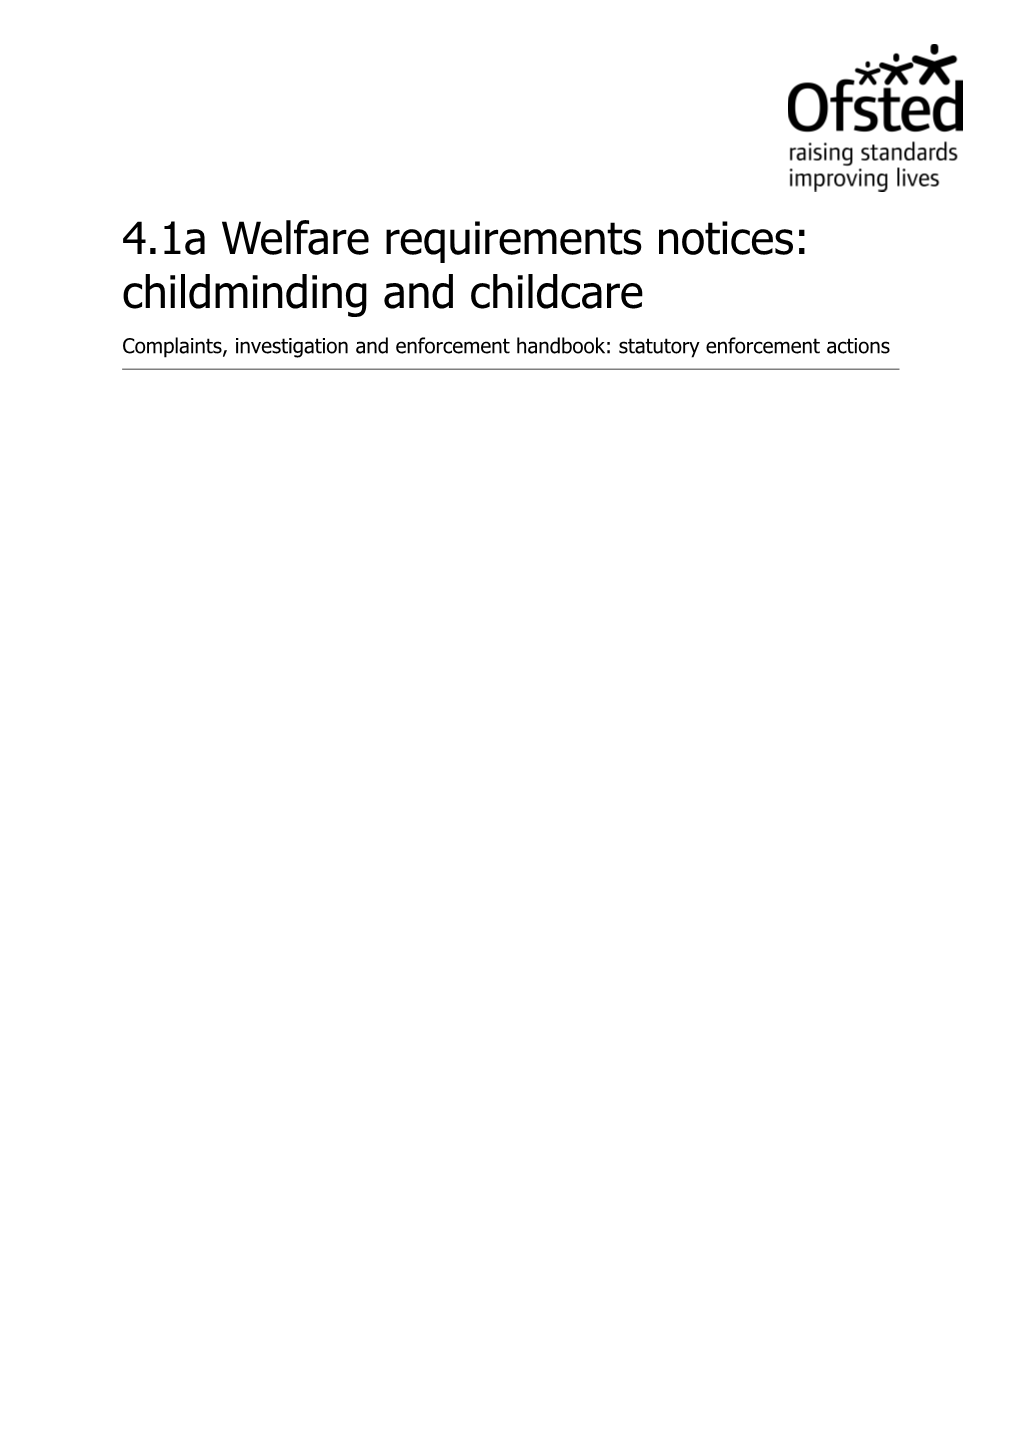 When to Serve a Welfare Requirements Notice 4